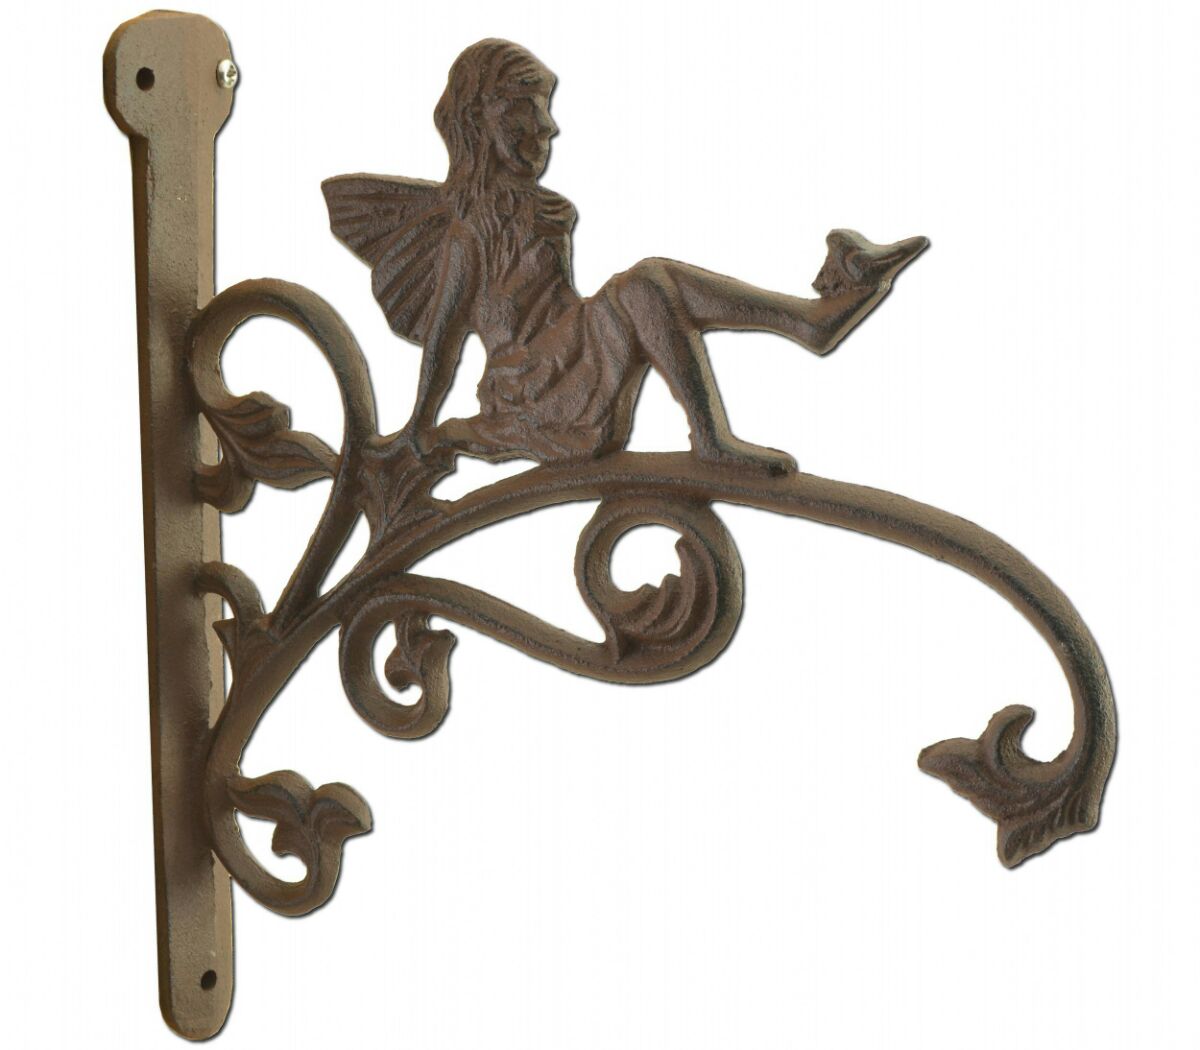 Cast Iron Plant Hanger - Pixie Fairy - Rust Color - 9.5 inch Tall